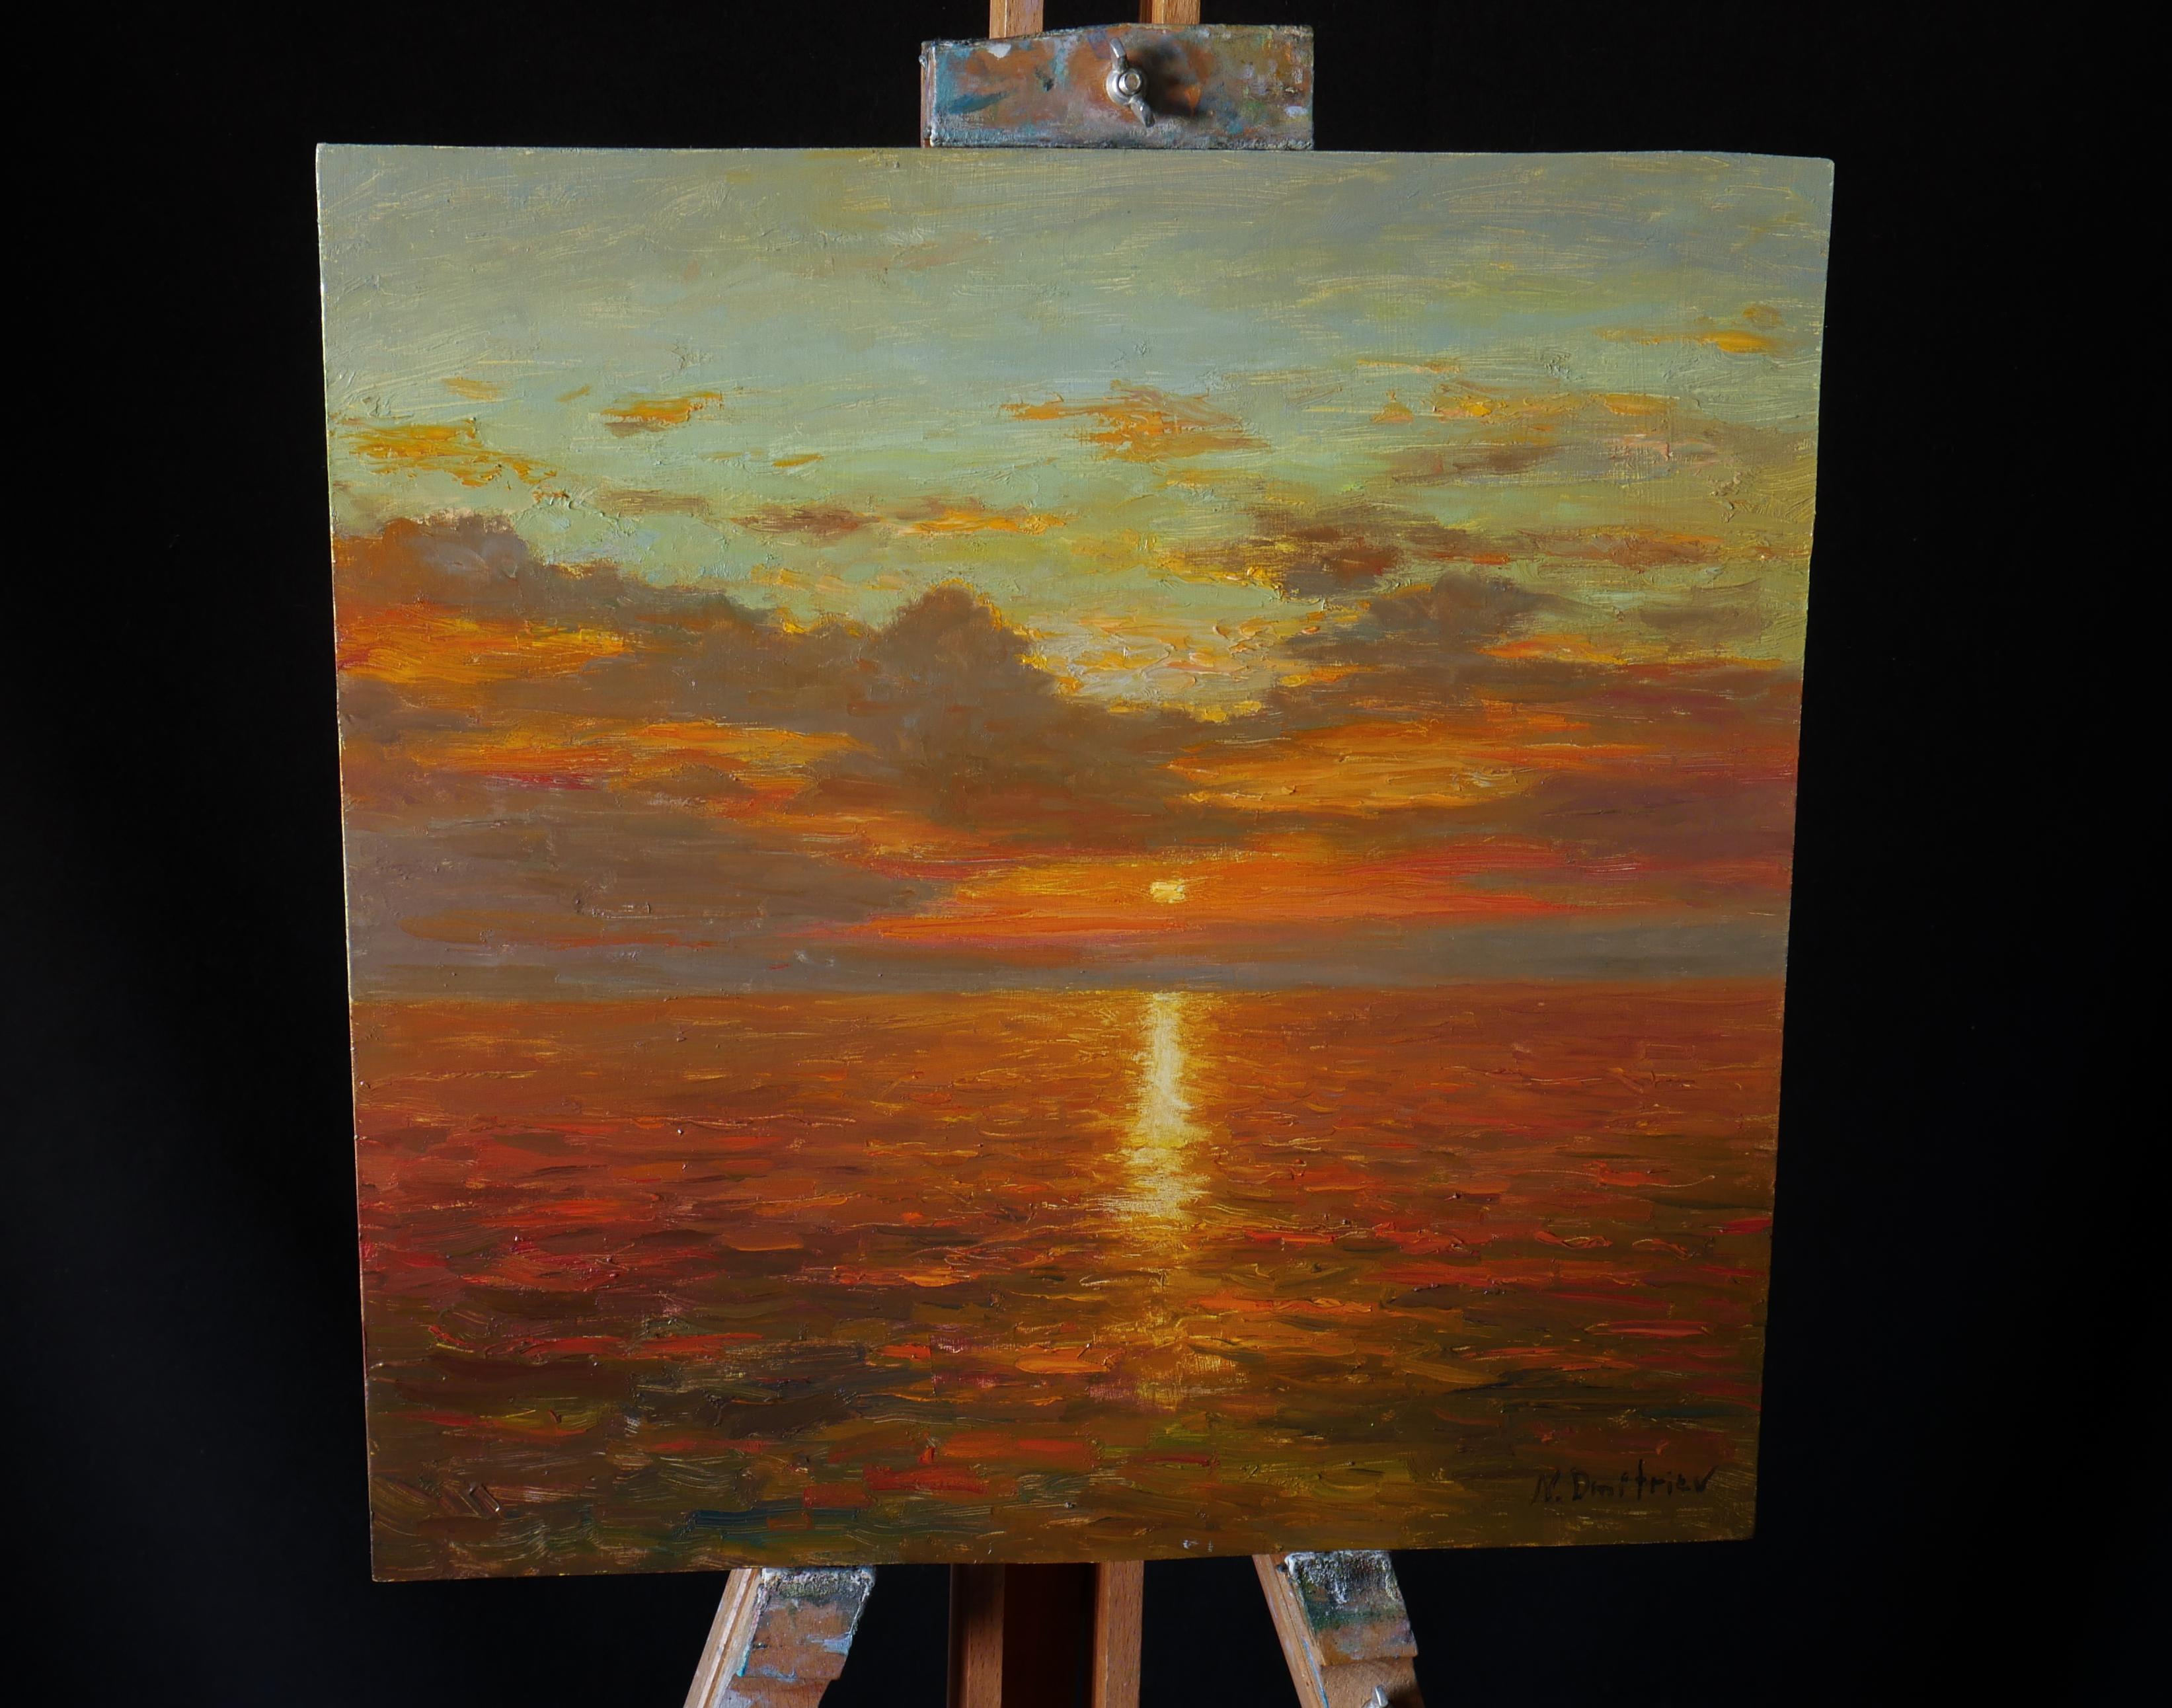 Bright Sunset Over The Sea - original oil painting  - Painting by Nikolay Dmitriev